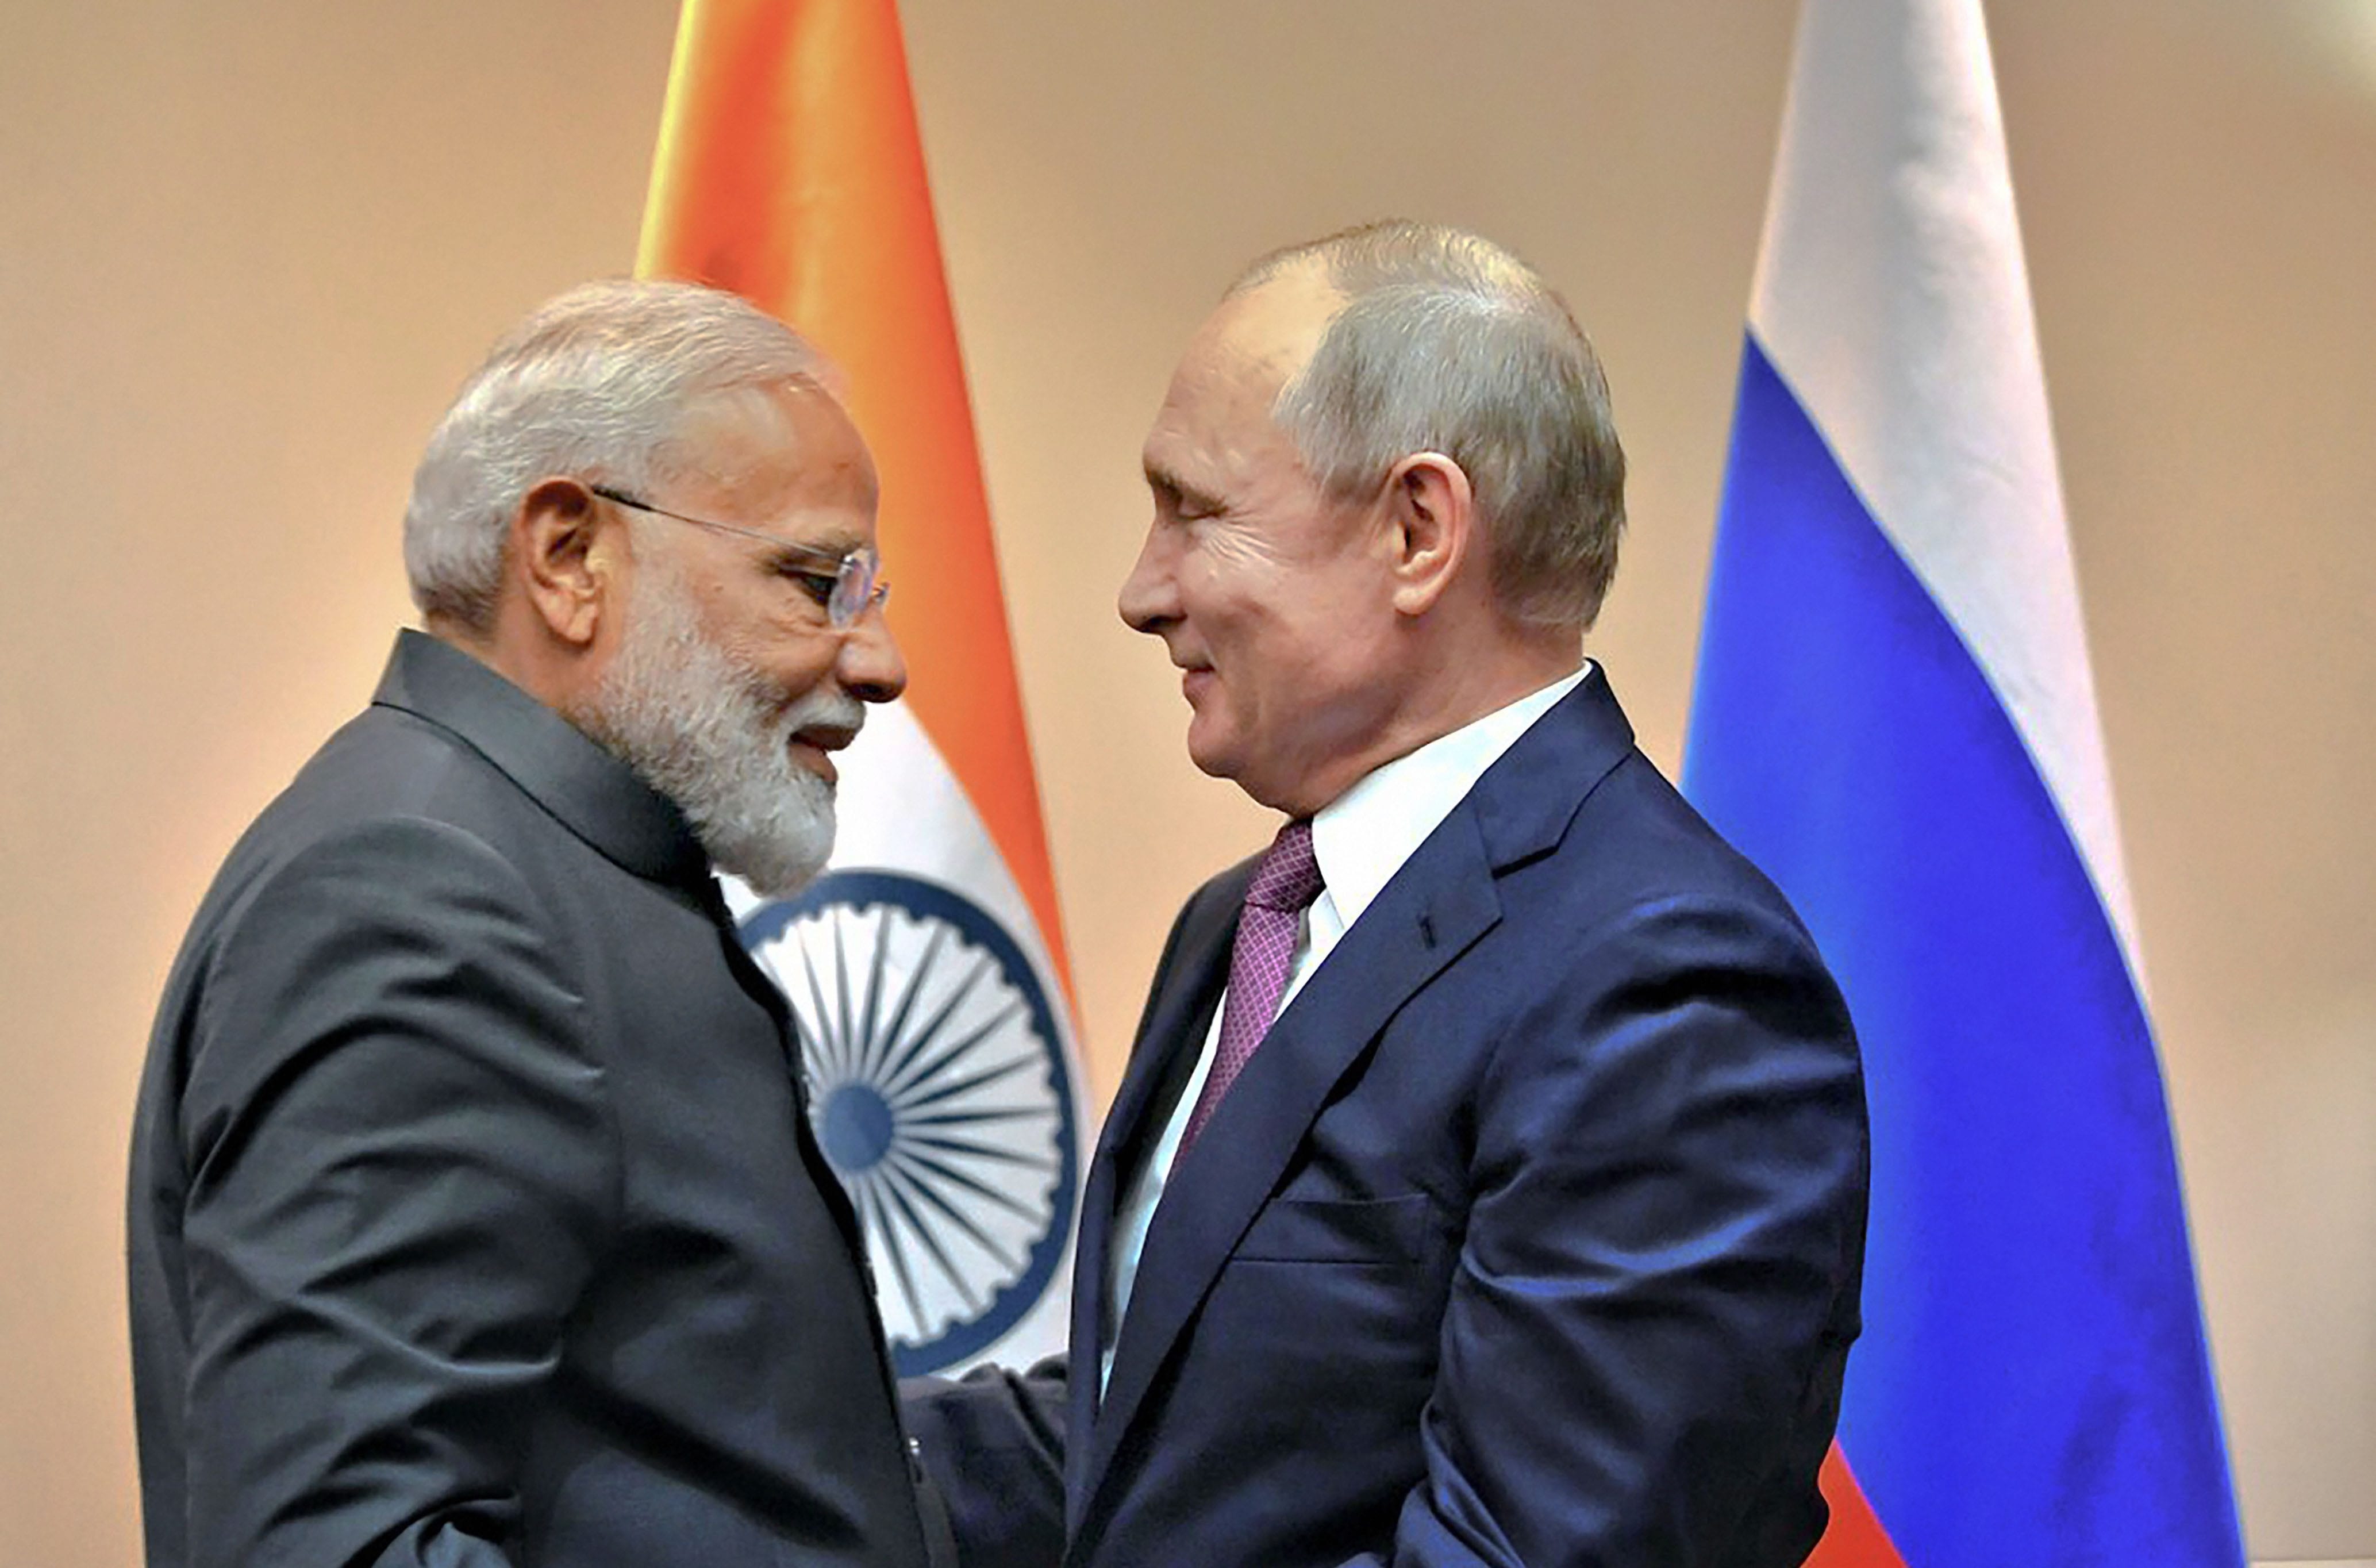 As Putin lands in Delhi, Russia-India poised to sign over 10 agreements